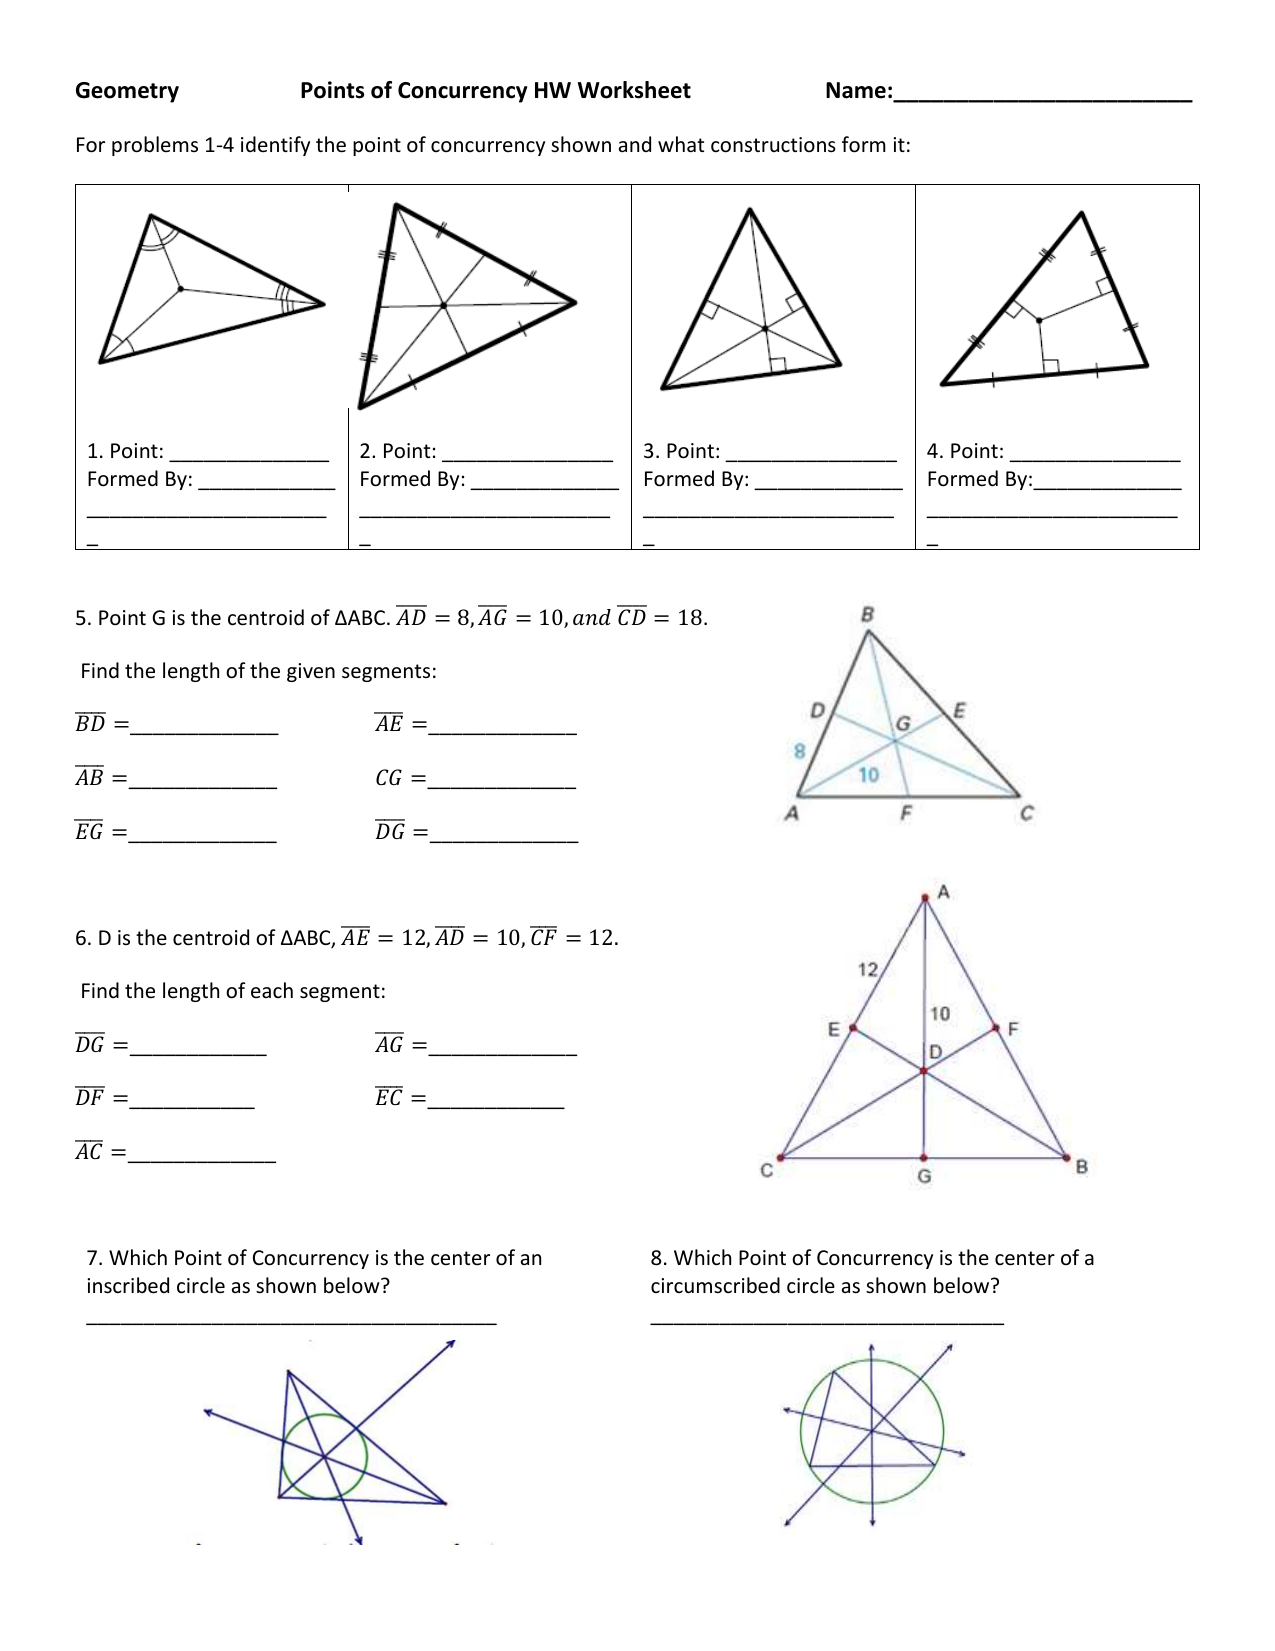 Geometry WS Points of concurrency For Geometry Points Of Concurrency Worksheet